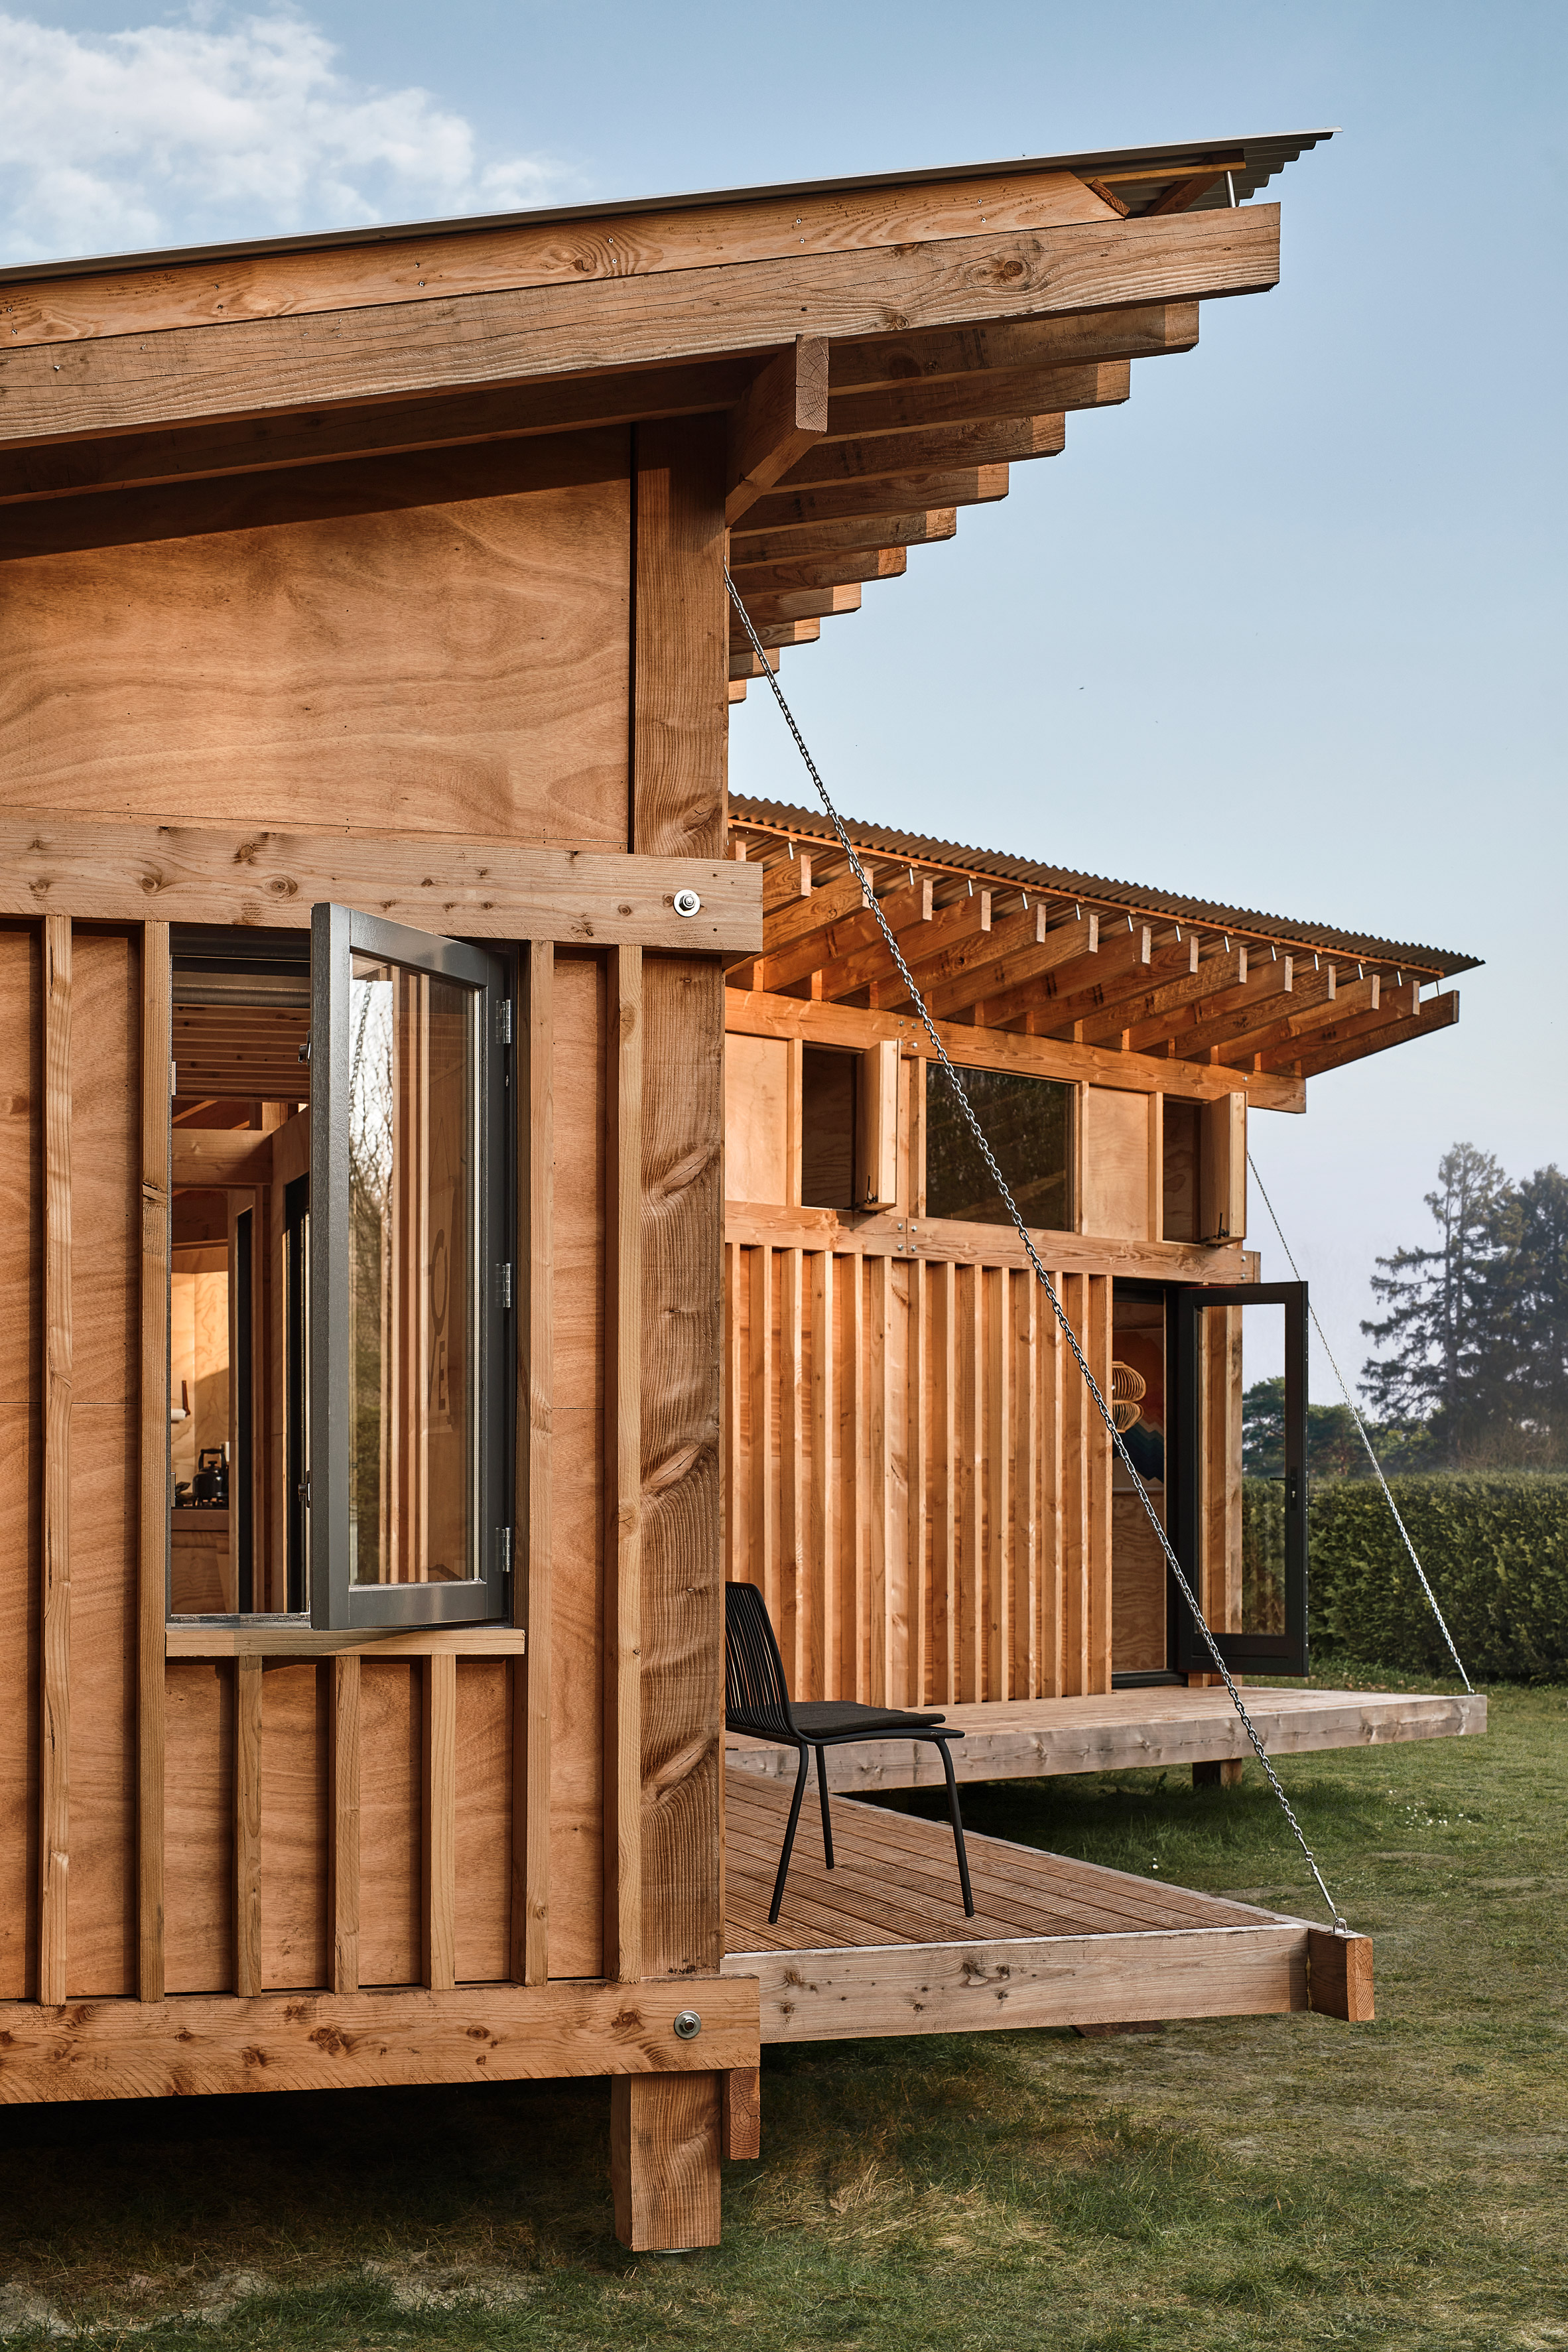 Exposed timber cabin in Drenthe, the Netherlands, by Crafted Works